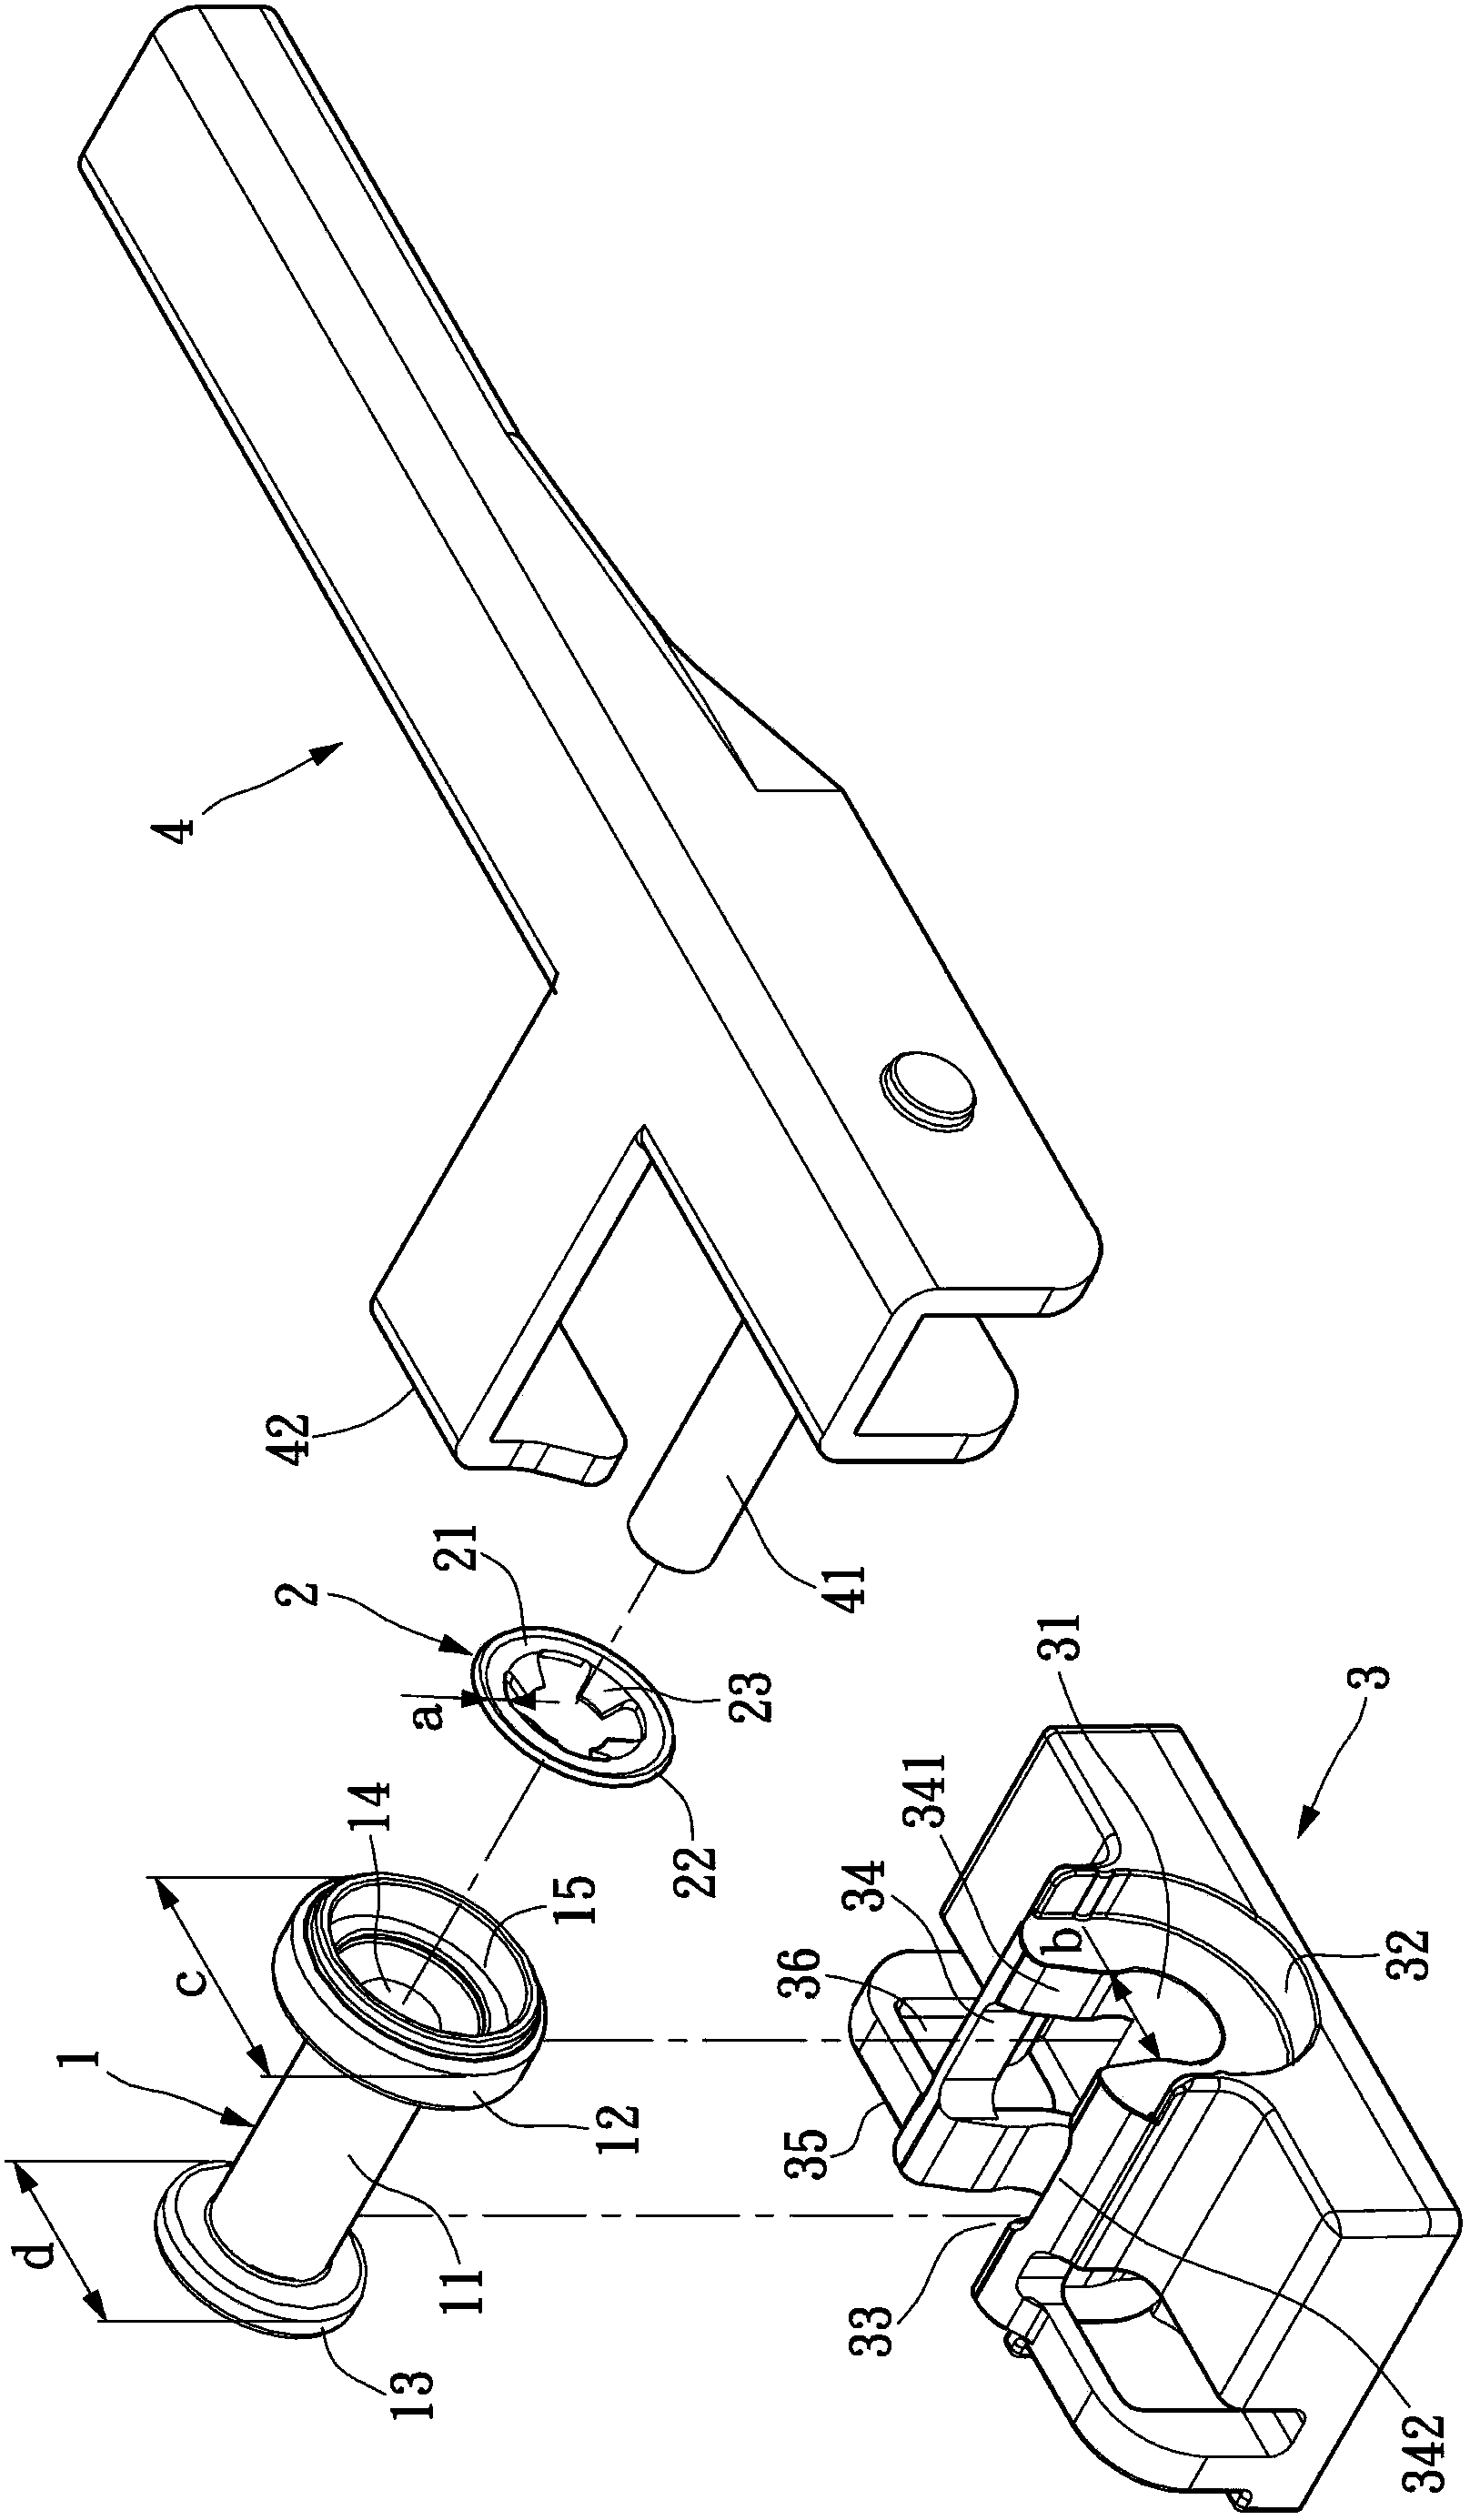 Windshield wiper connector and bolt force application stabilization sleeve